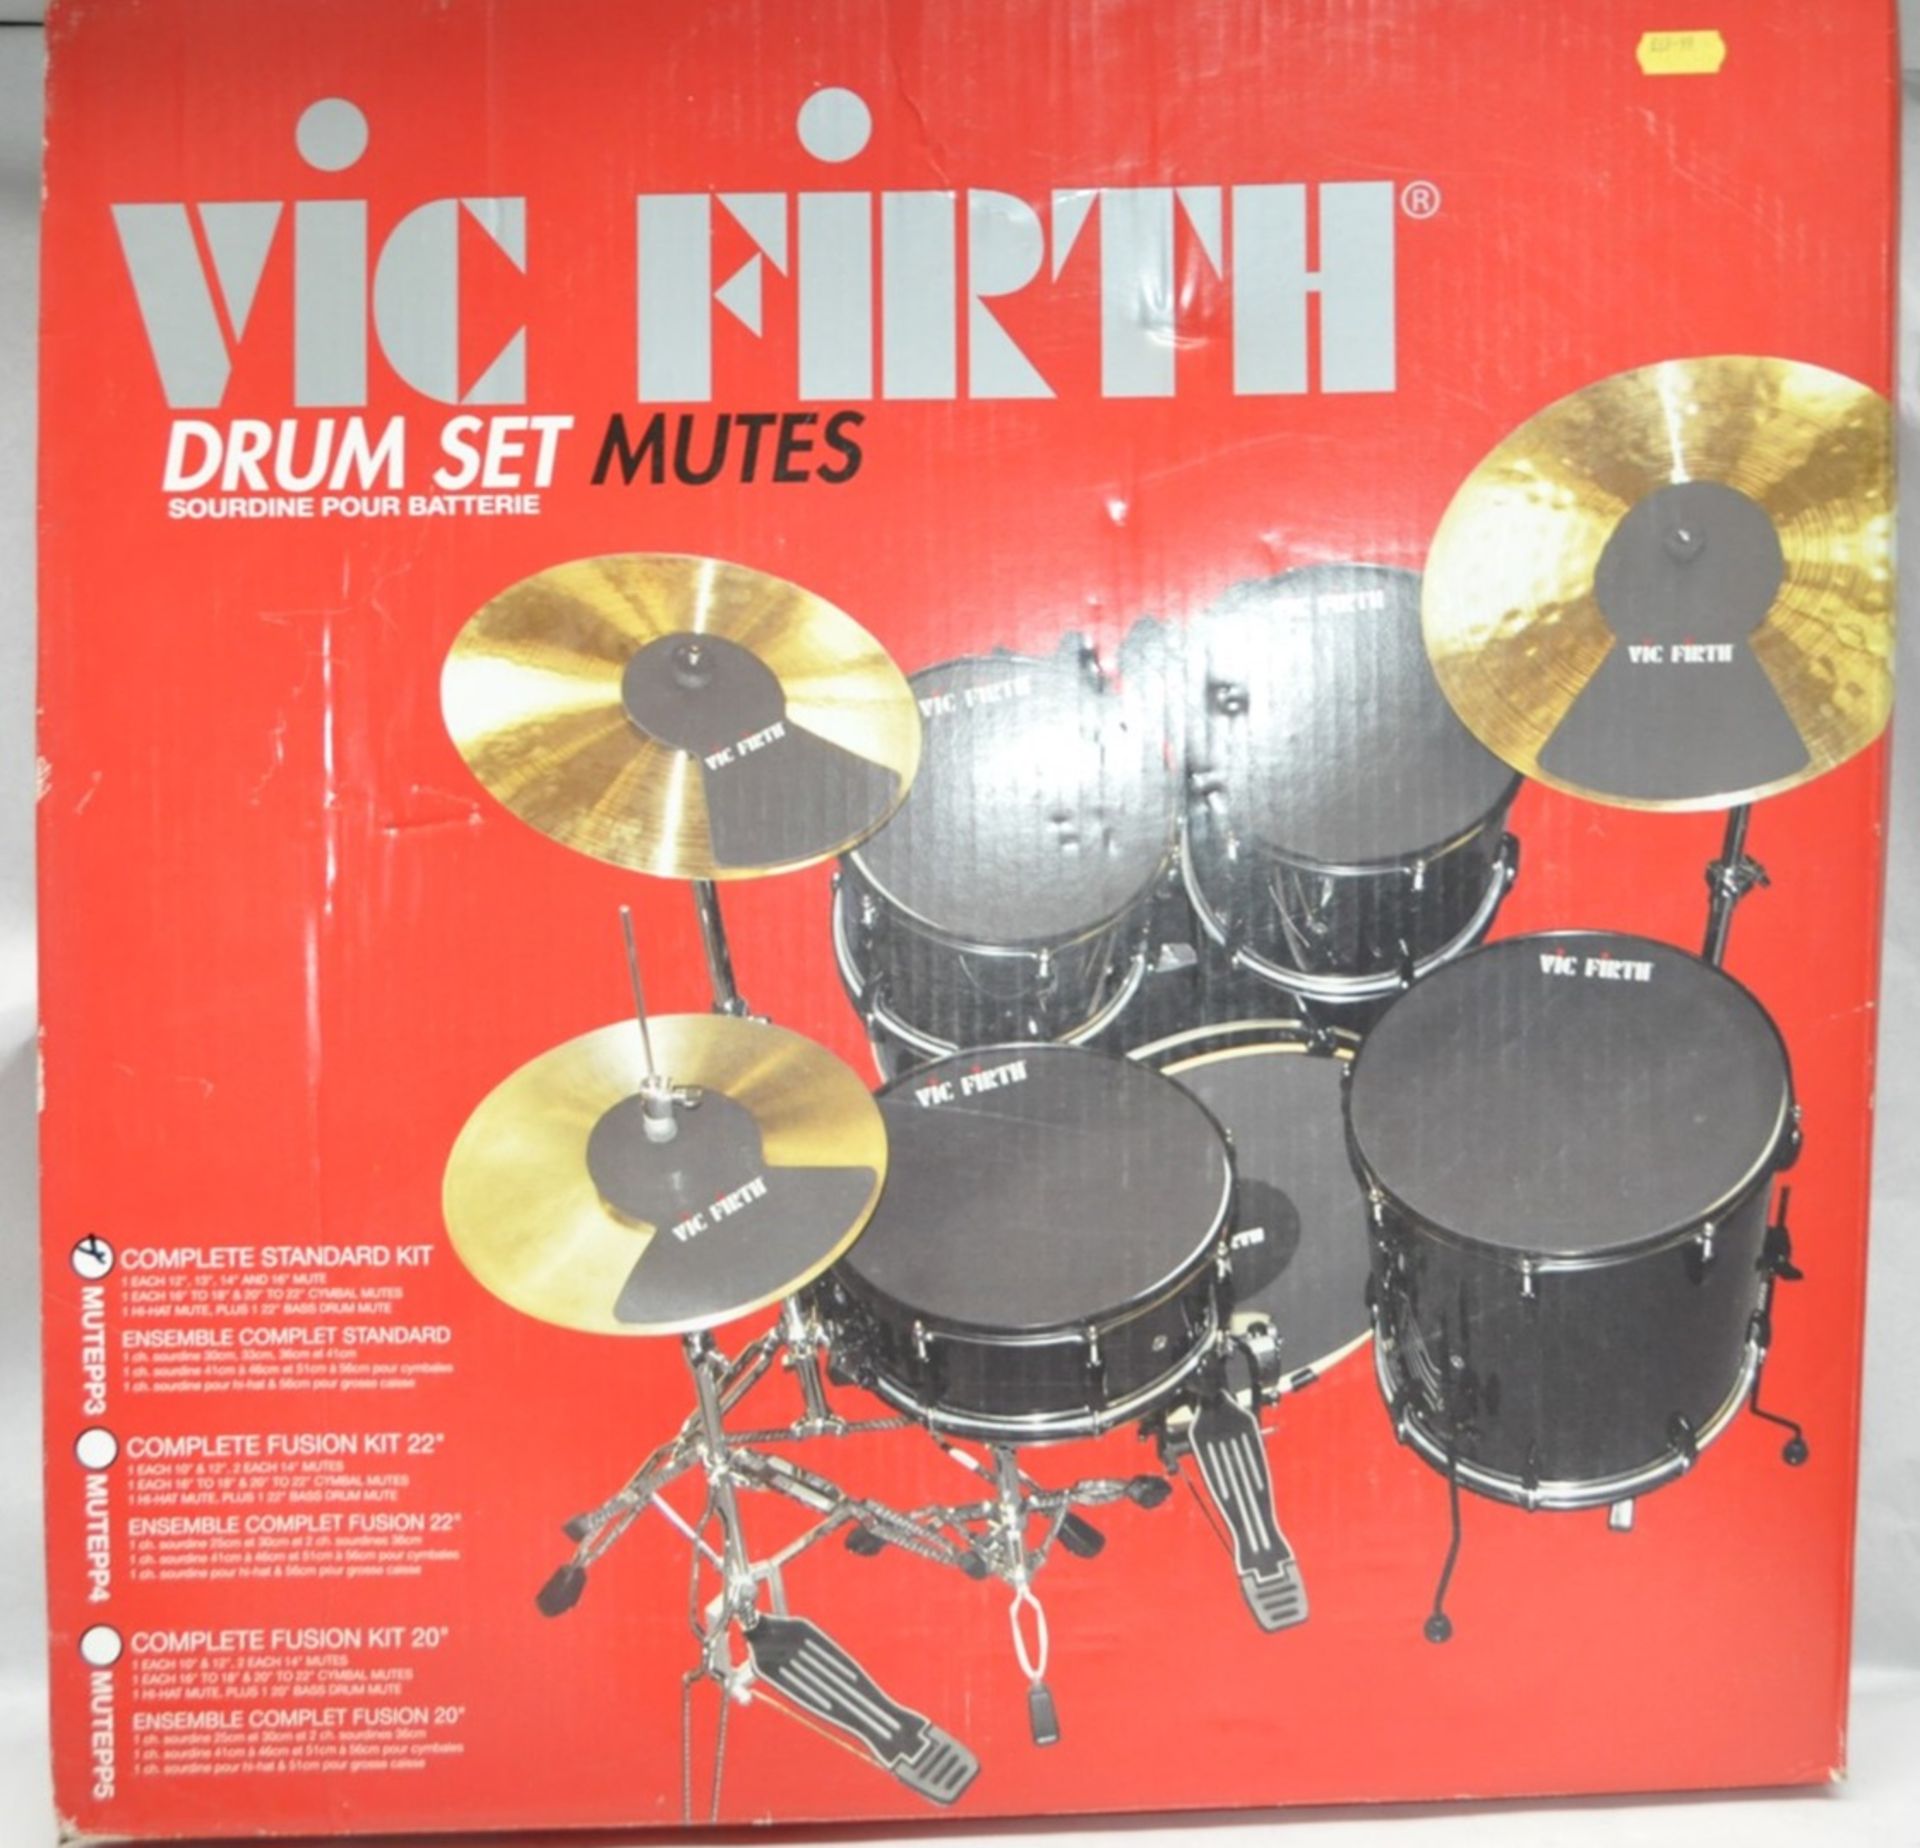 1 x Vic Firth Drum Set Mutes - Complete Standard Kit - CL020 - Ref Pro55 - Unused Stock -